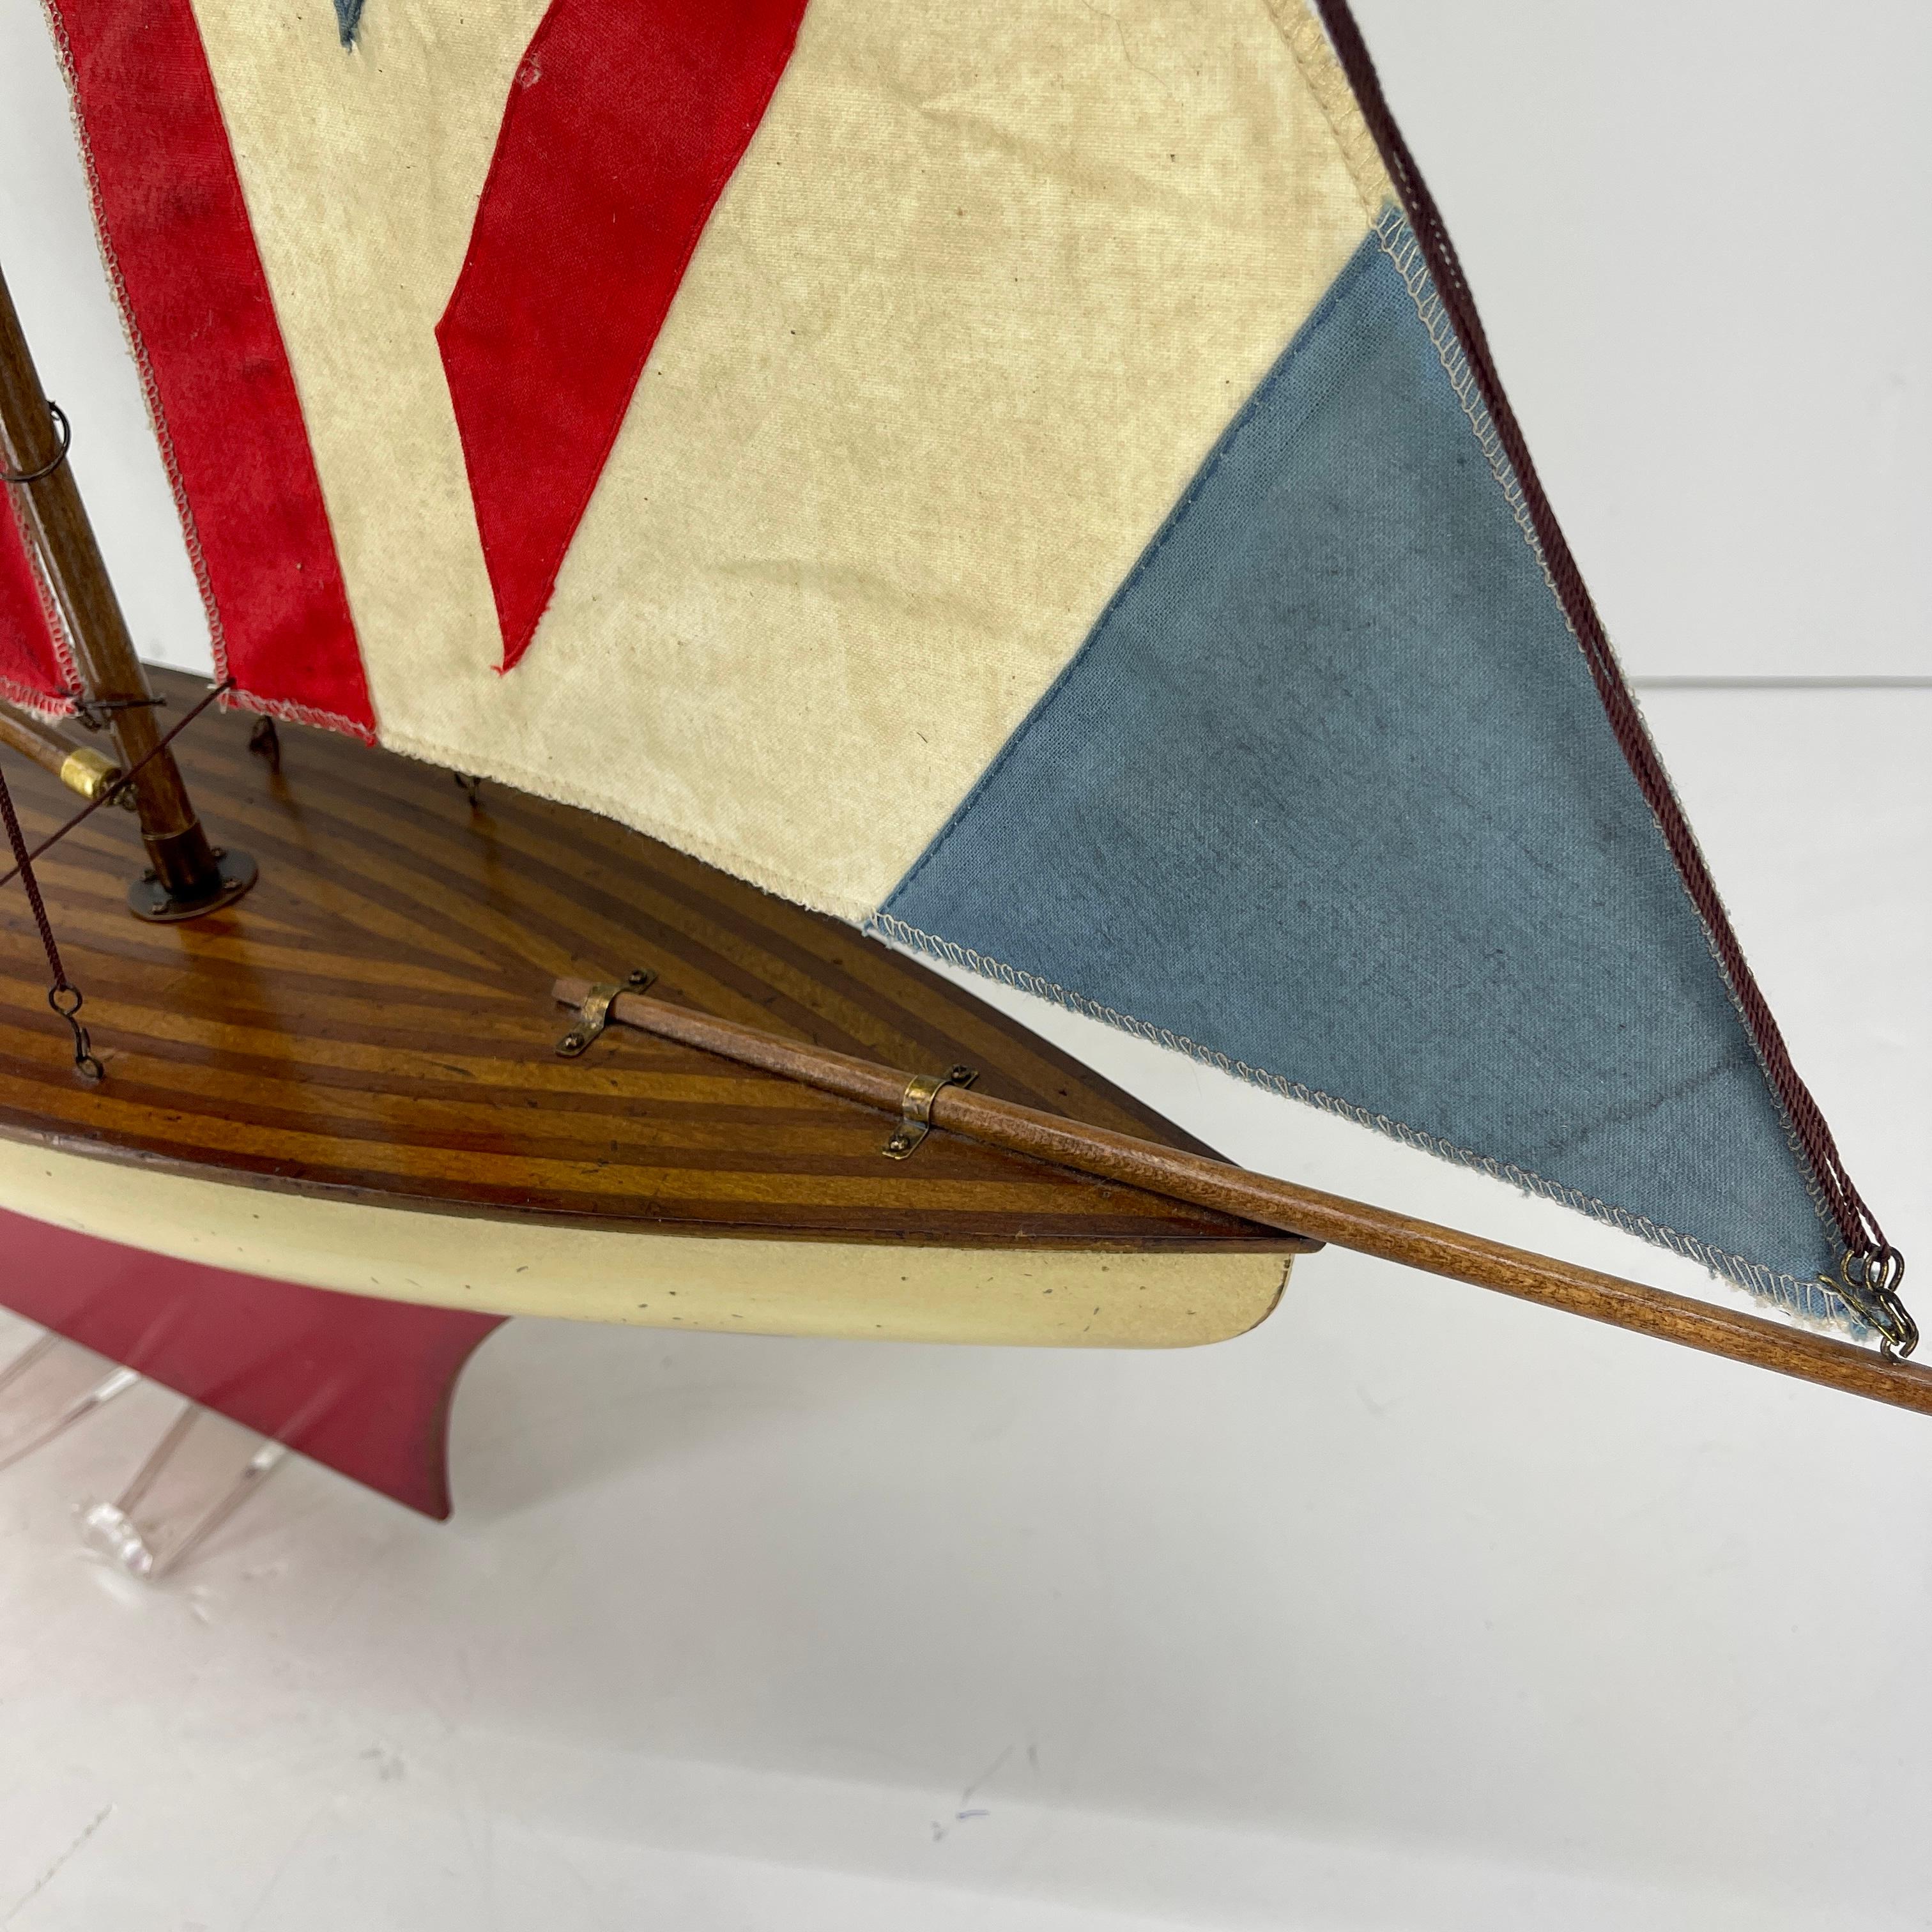 English Carved Wood Sailboat Model with Parquetry Deck and Union Jack Sailcloth 3